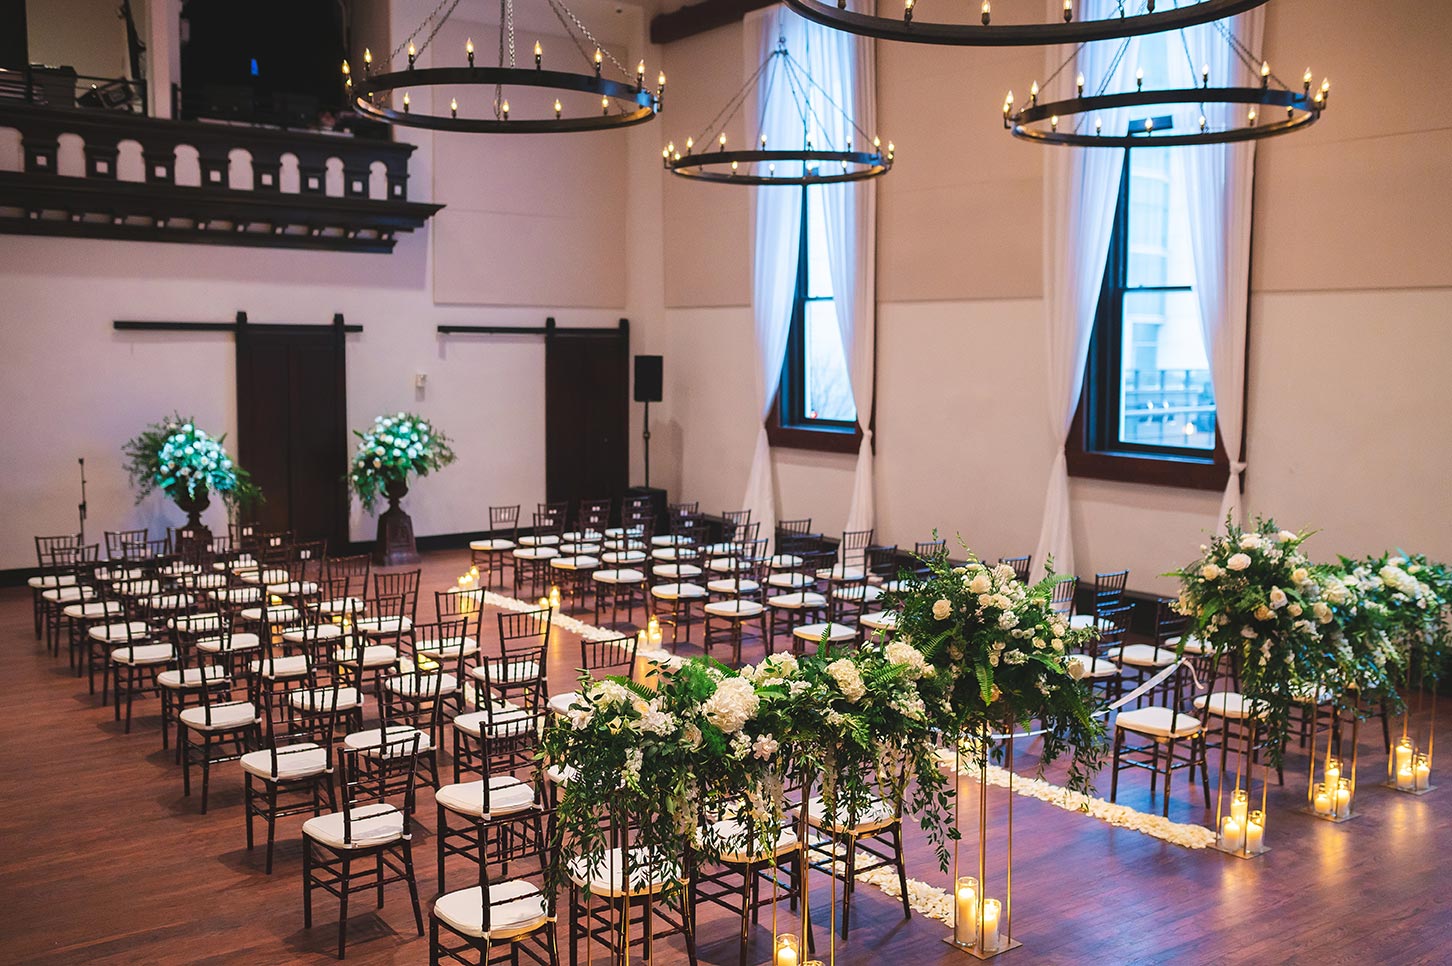 Ceremony space with large standing florals dark colored chairs rose petal lined aisle with candles